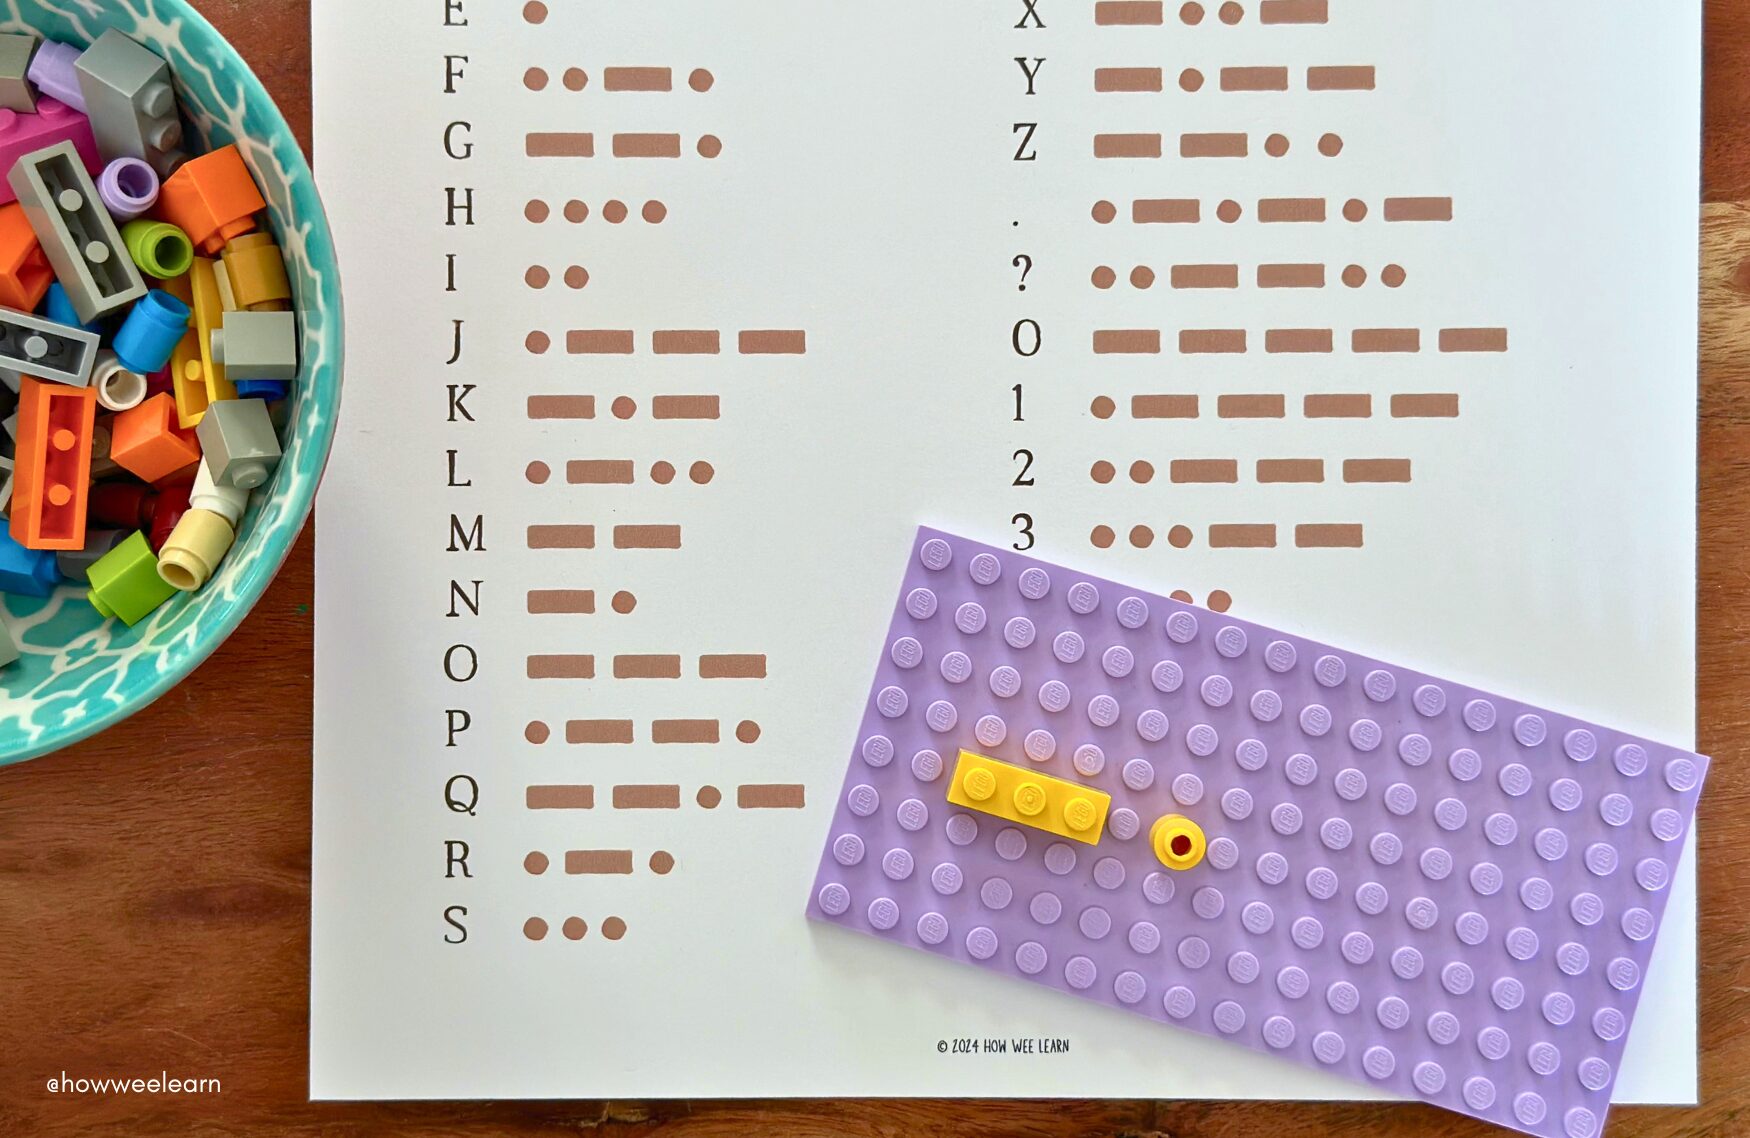 International morse code printable with lego bricks showing the letter N in morse code